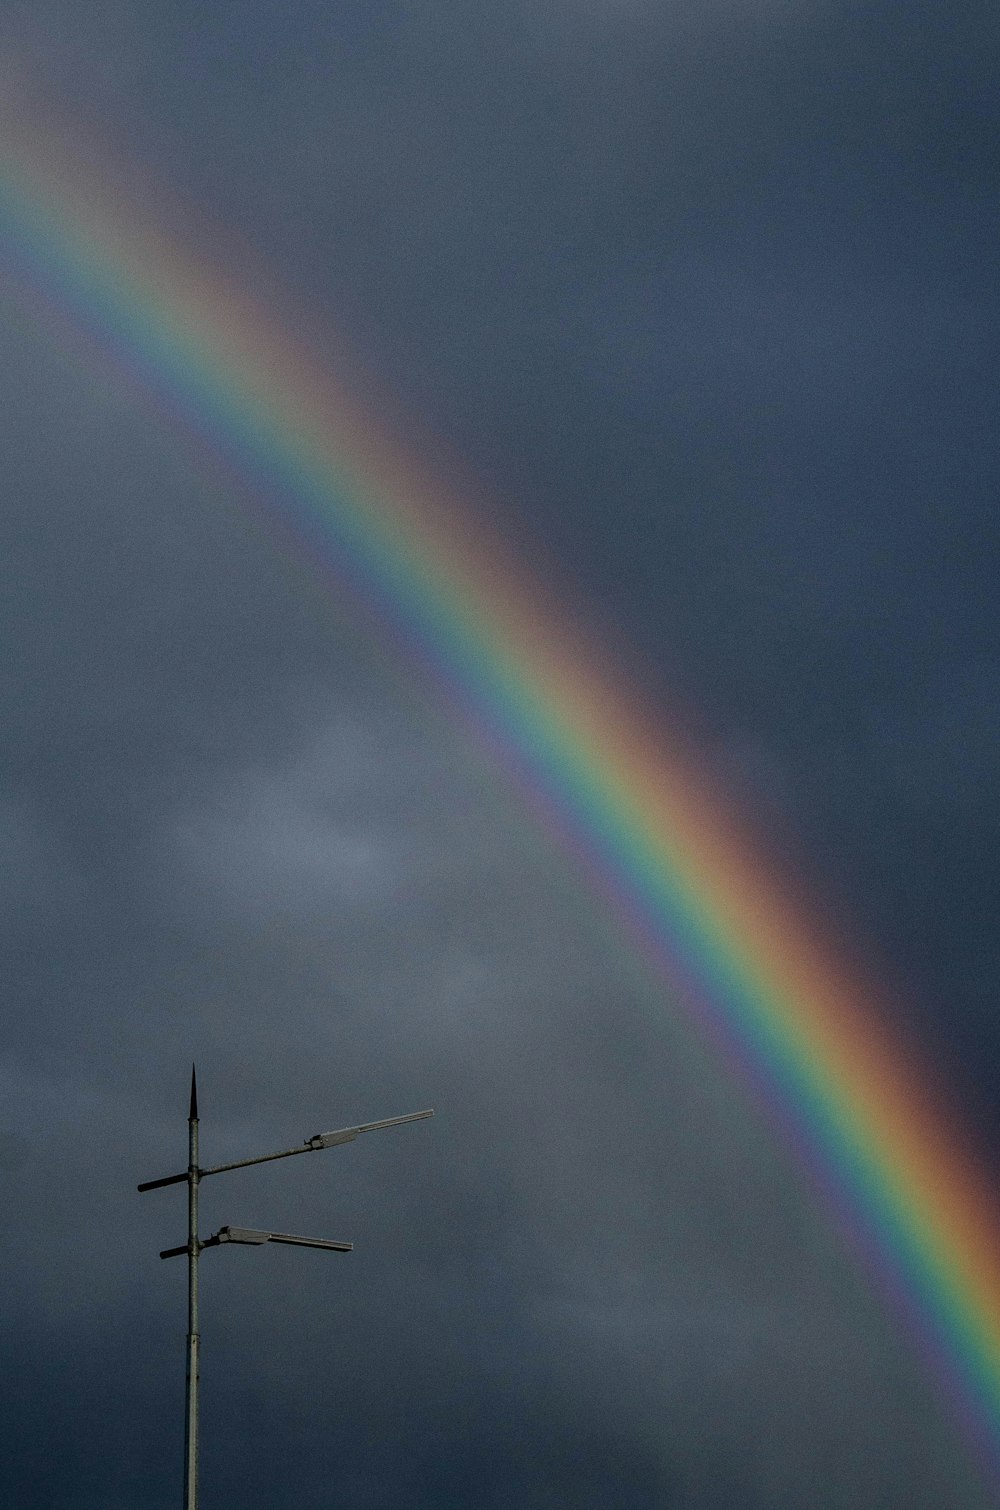 a rainbow in the sky with a weather vane in the foreground